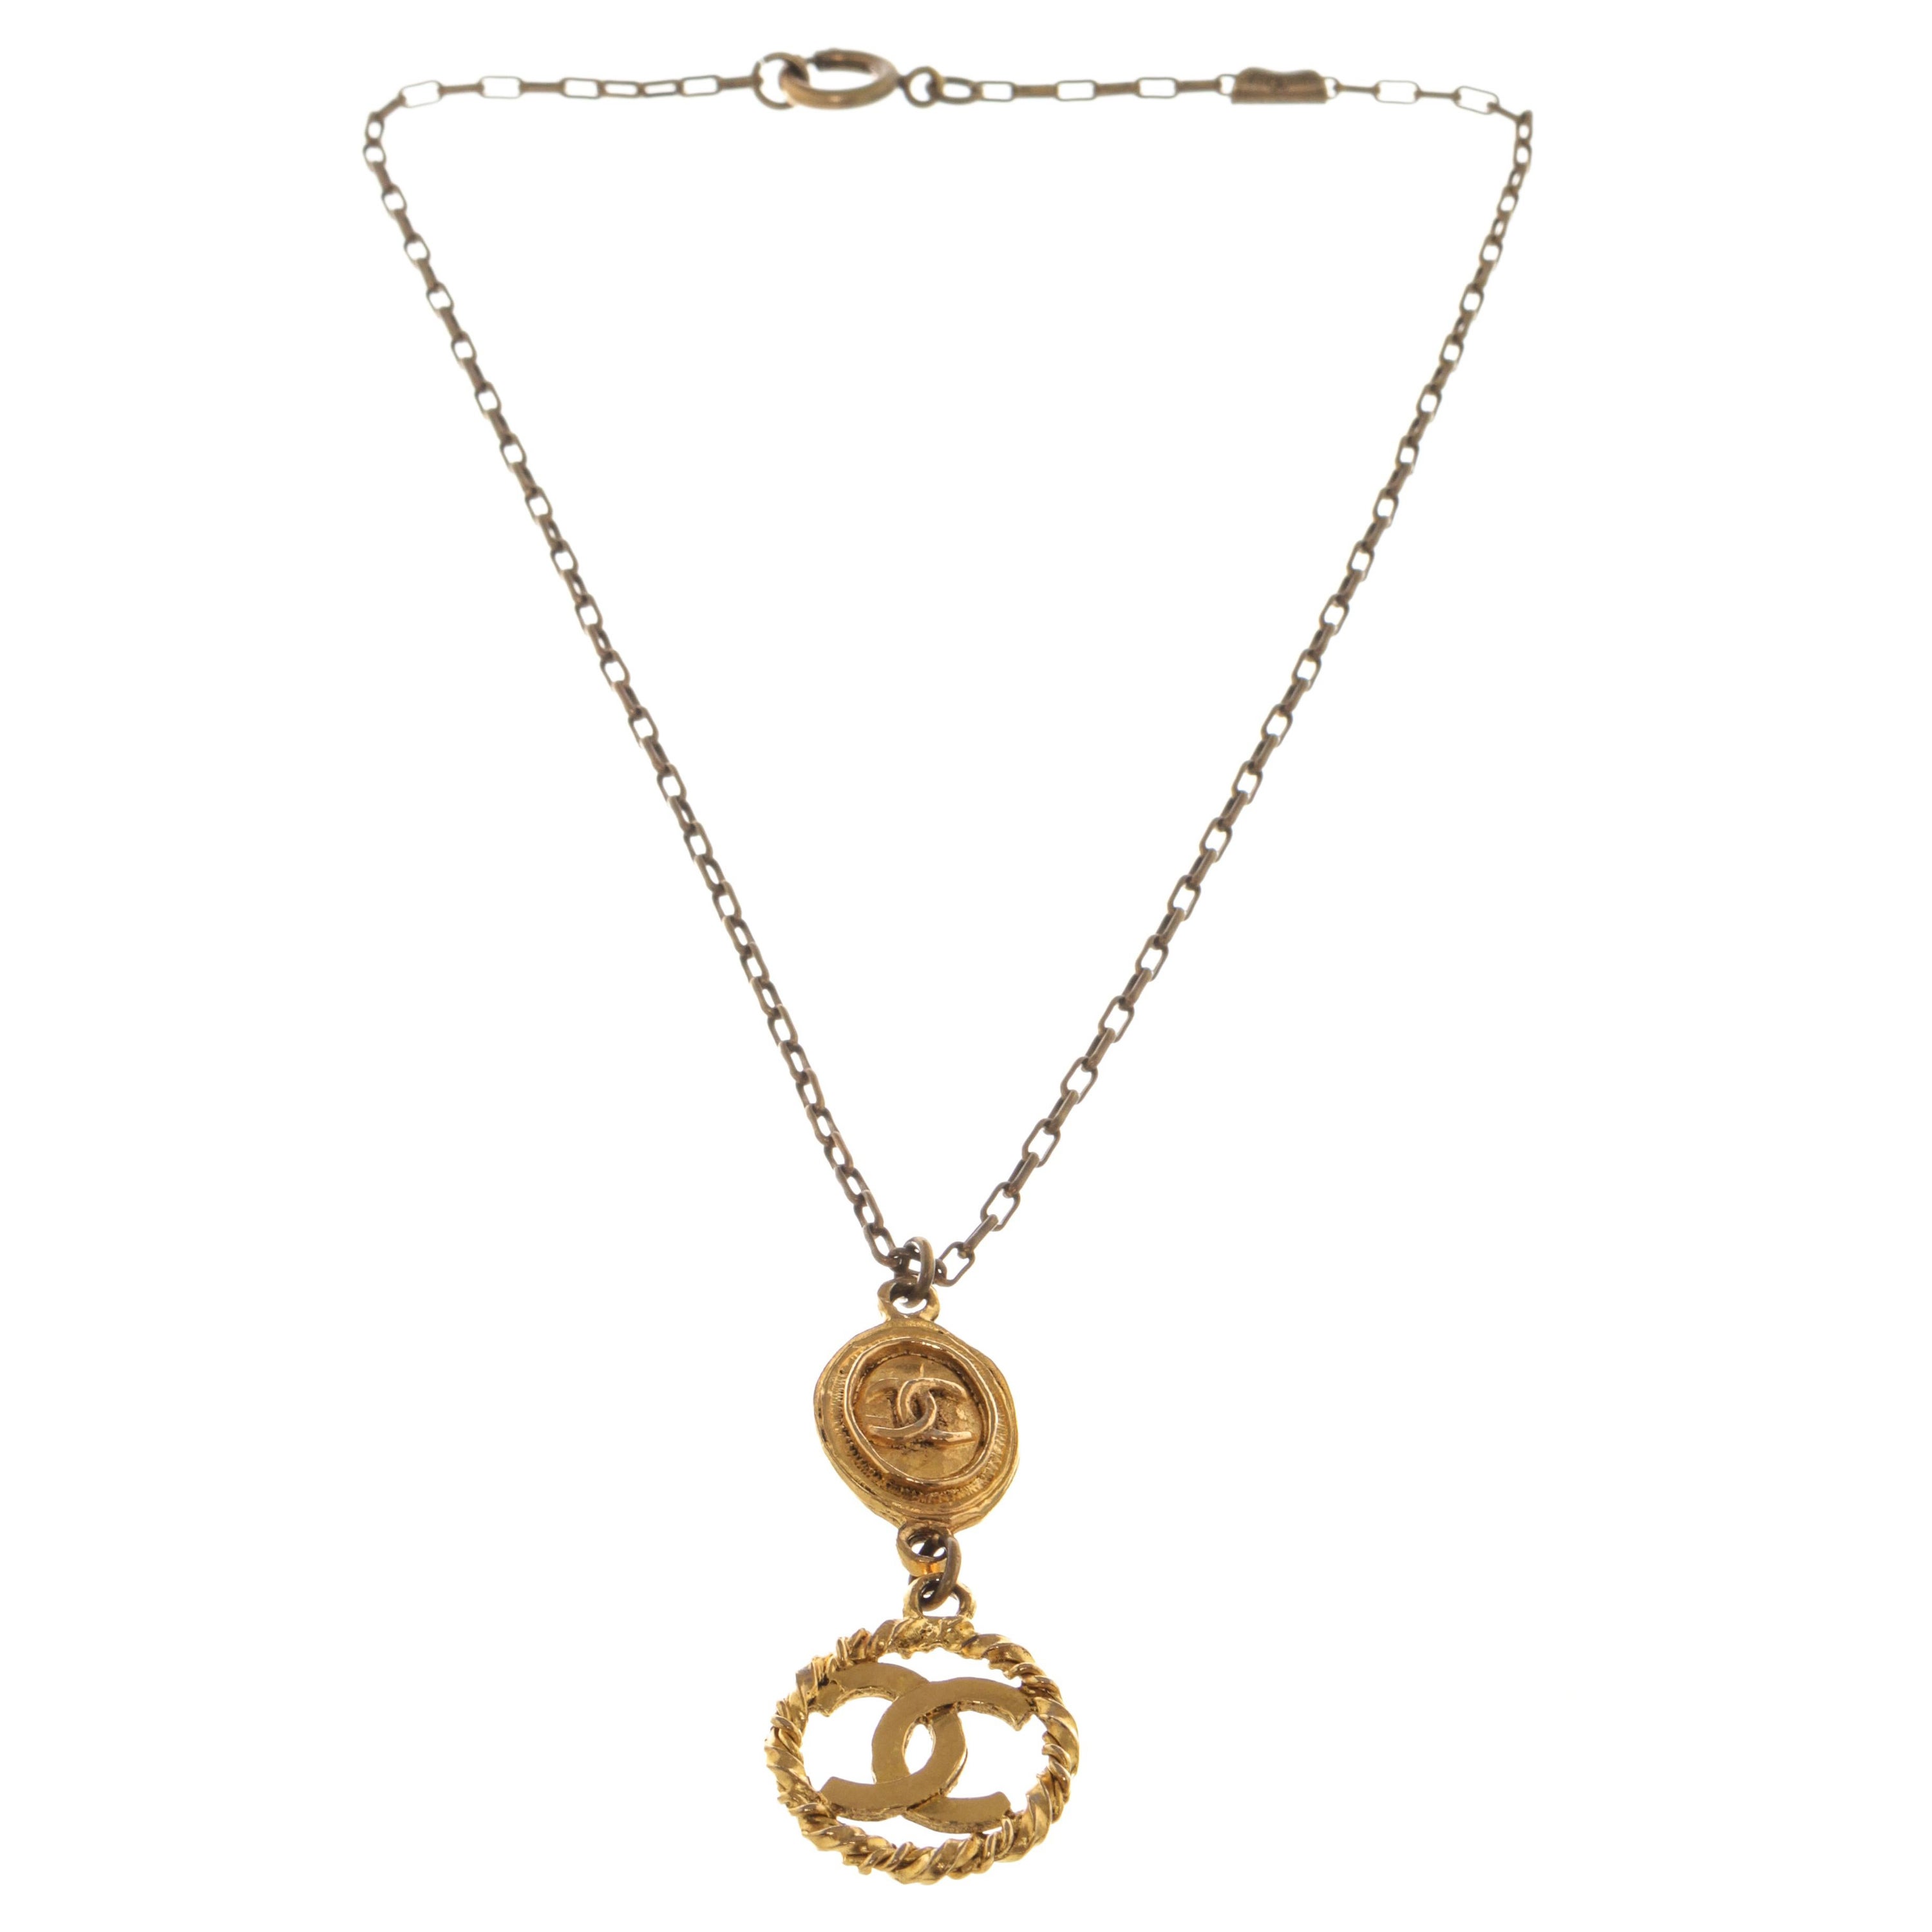 Vintage Chanel Gold Necklace with Intricate Pearl Pendant For Sale at